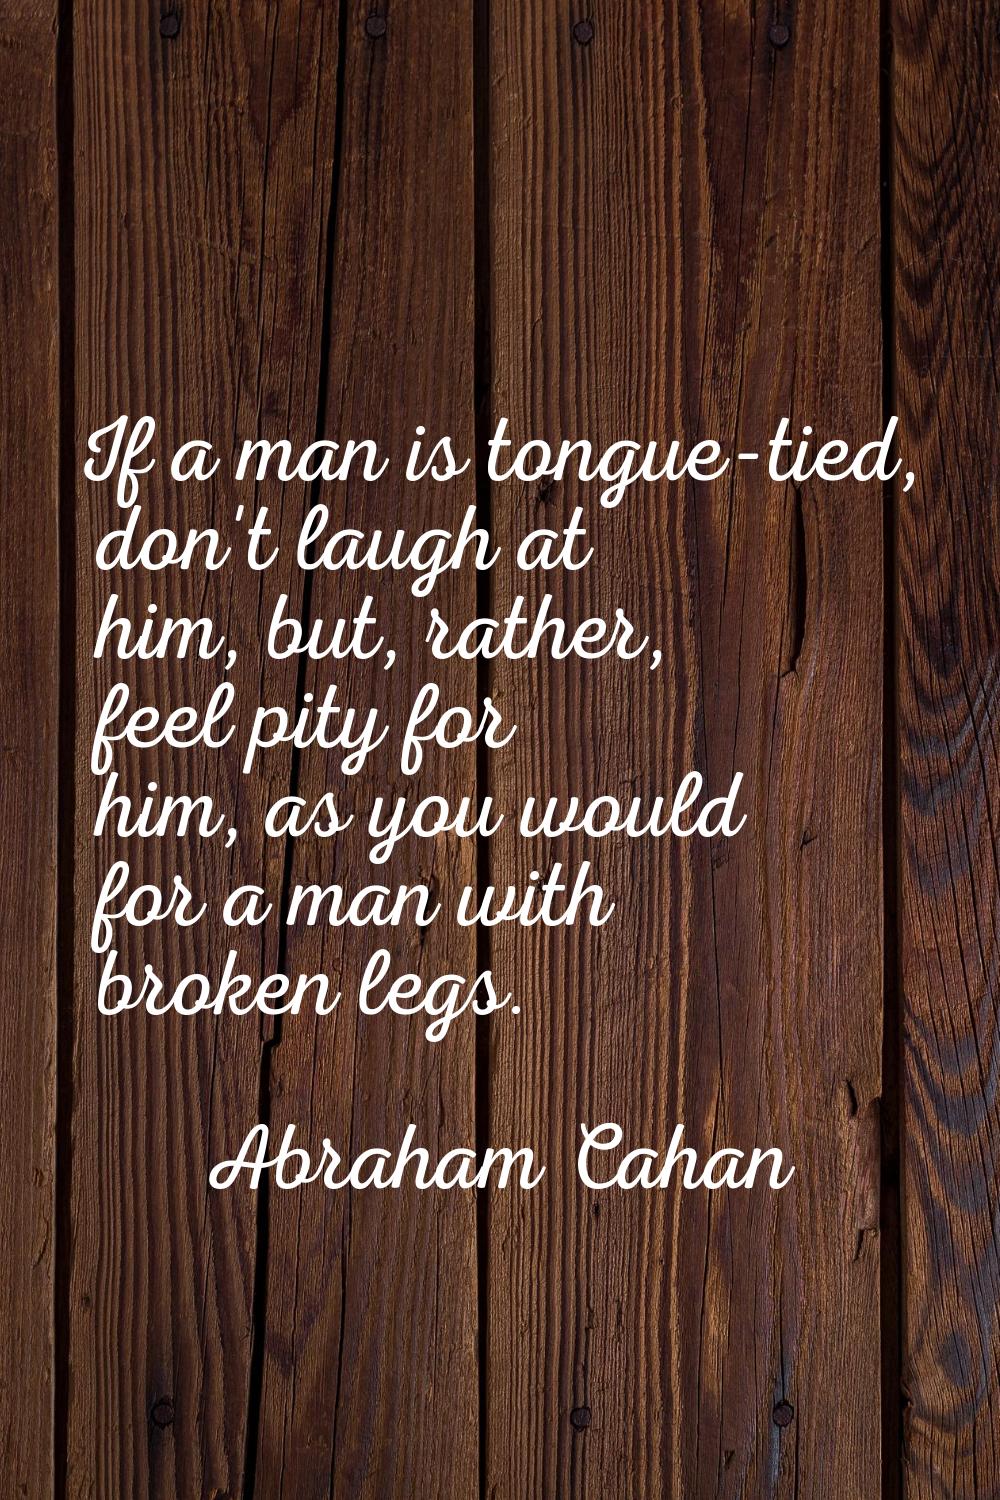 If a man is tongue-tied, don't laugh at him, but, rather, feel pity for him, as you would for a man